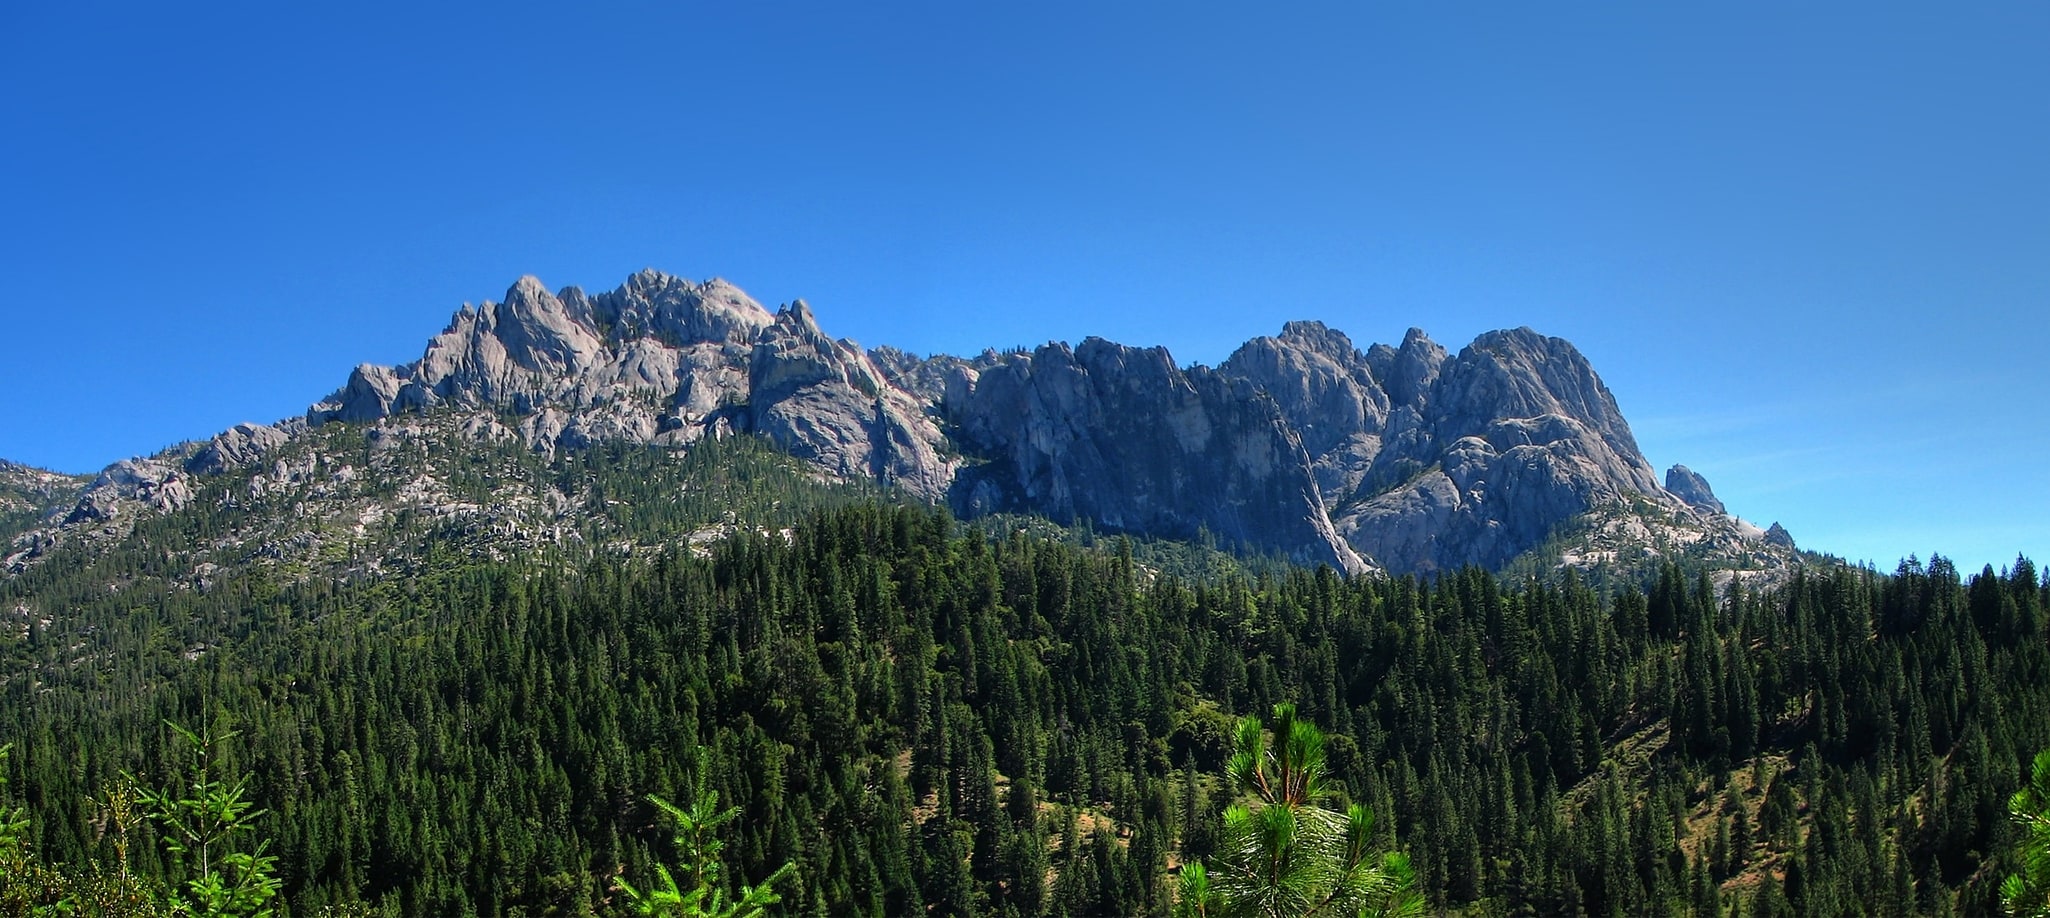 Castle Crags Wilderness, United States